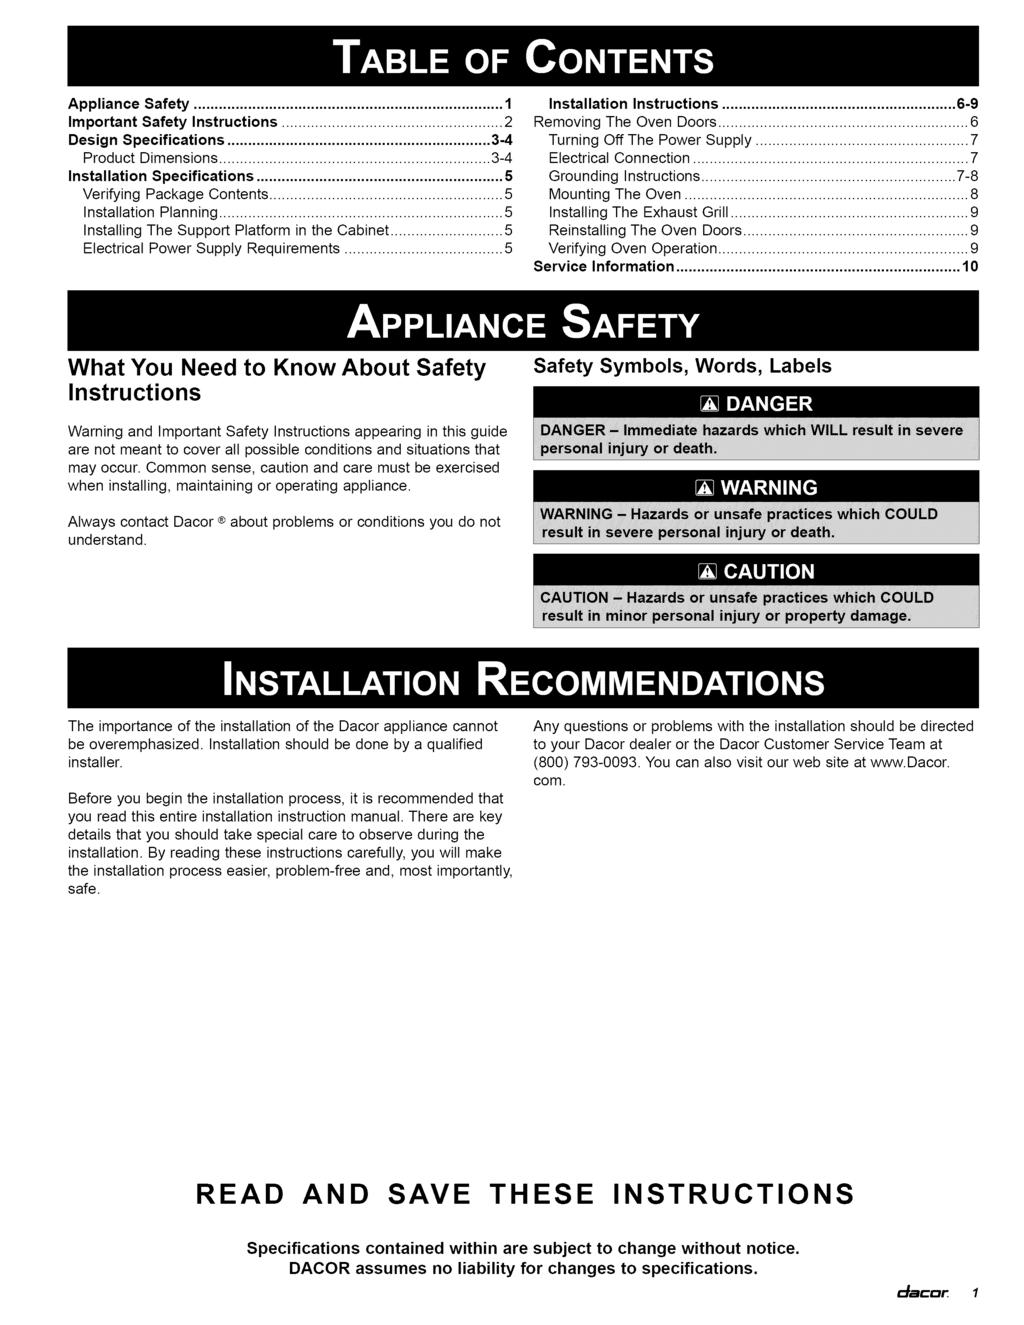 Appliance Safety 1 Important Safety Instructions 2 Design Specifications 3-4 Product Dimensions 3-4 Installation Specifications 5 Verifying Package Contents 5 Installation Planning 5 Installing The